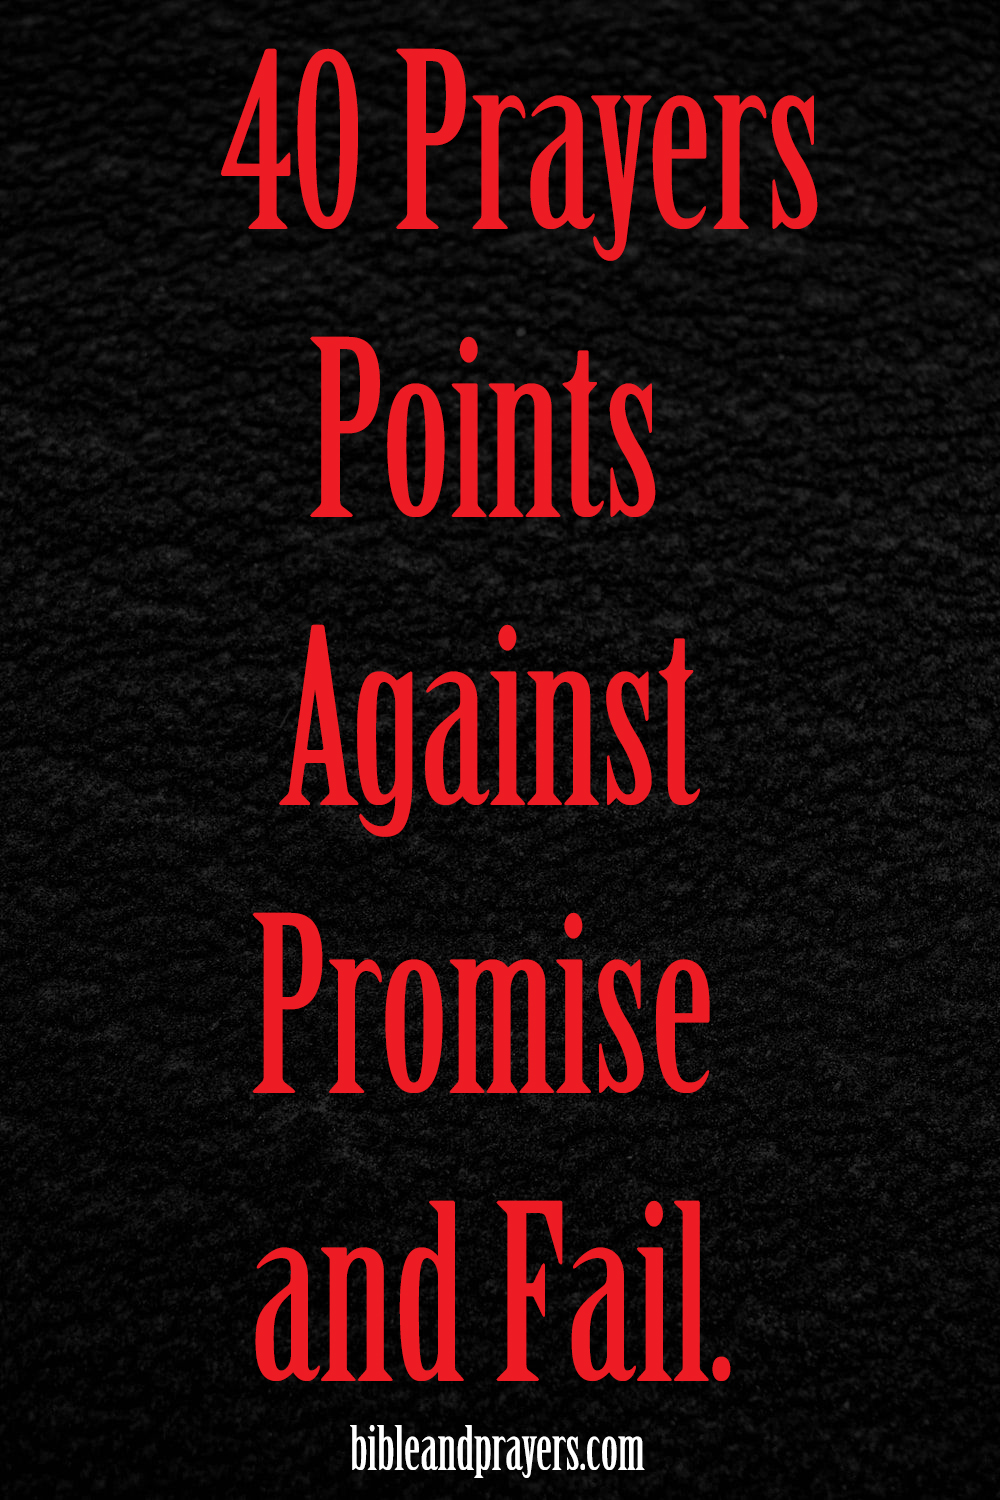 40 Prayers Points Against Promise and Fail.